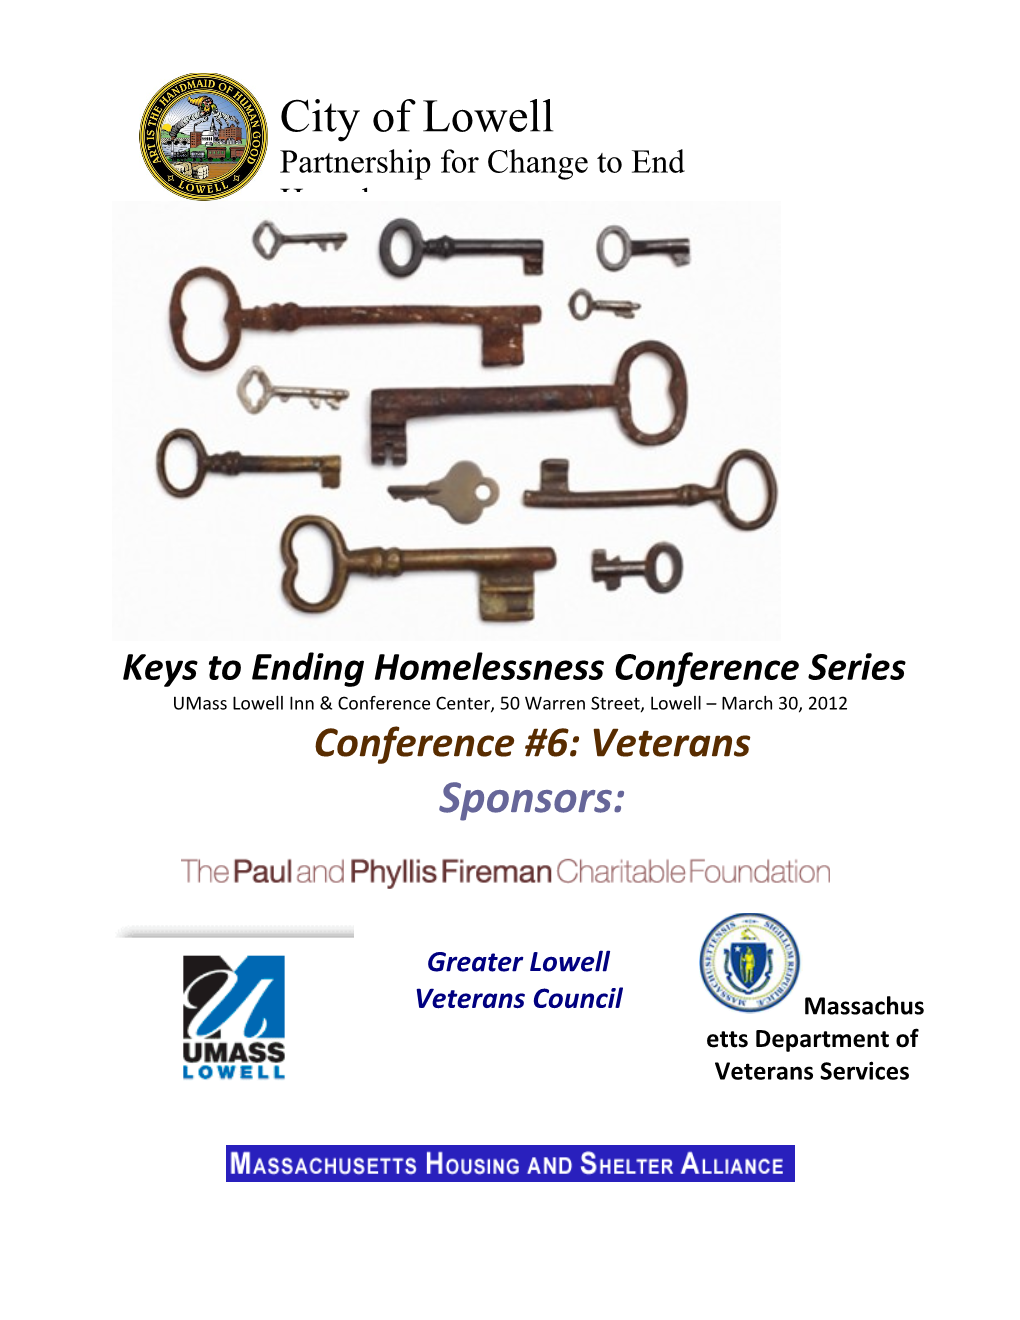 City of Lowell Keys to Ending Homelessness Conference 3: Housing